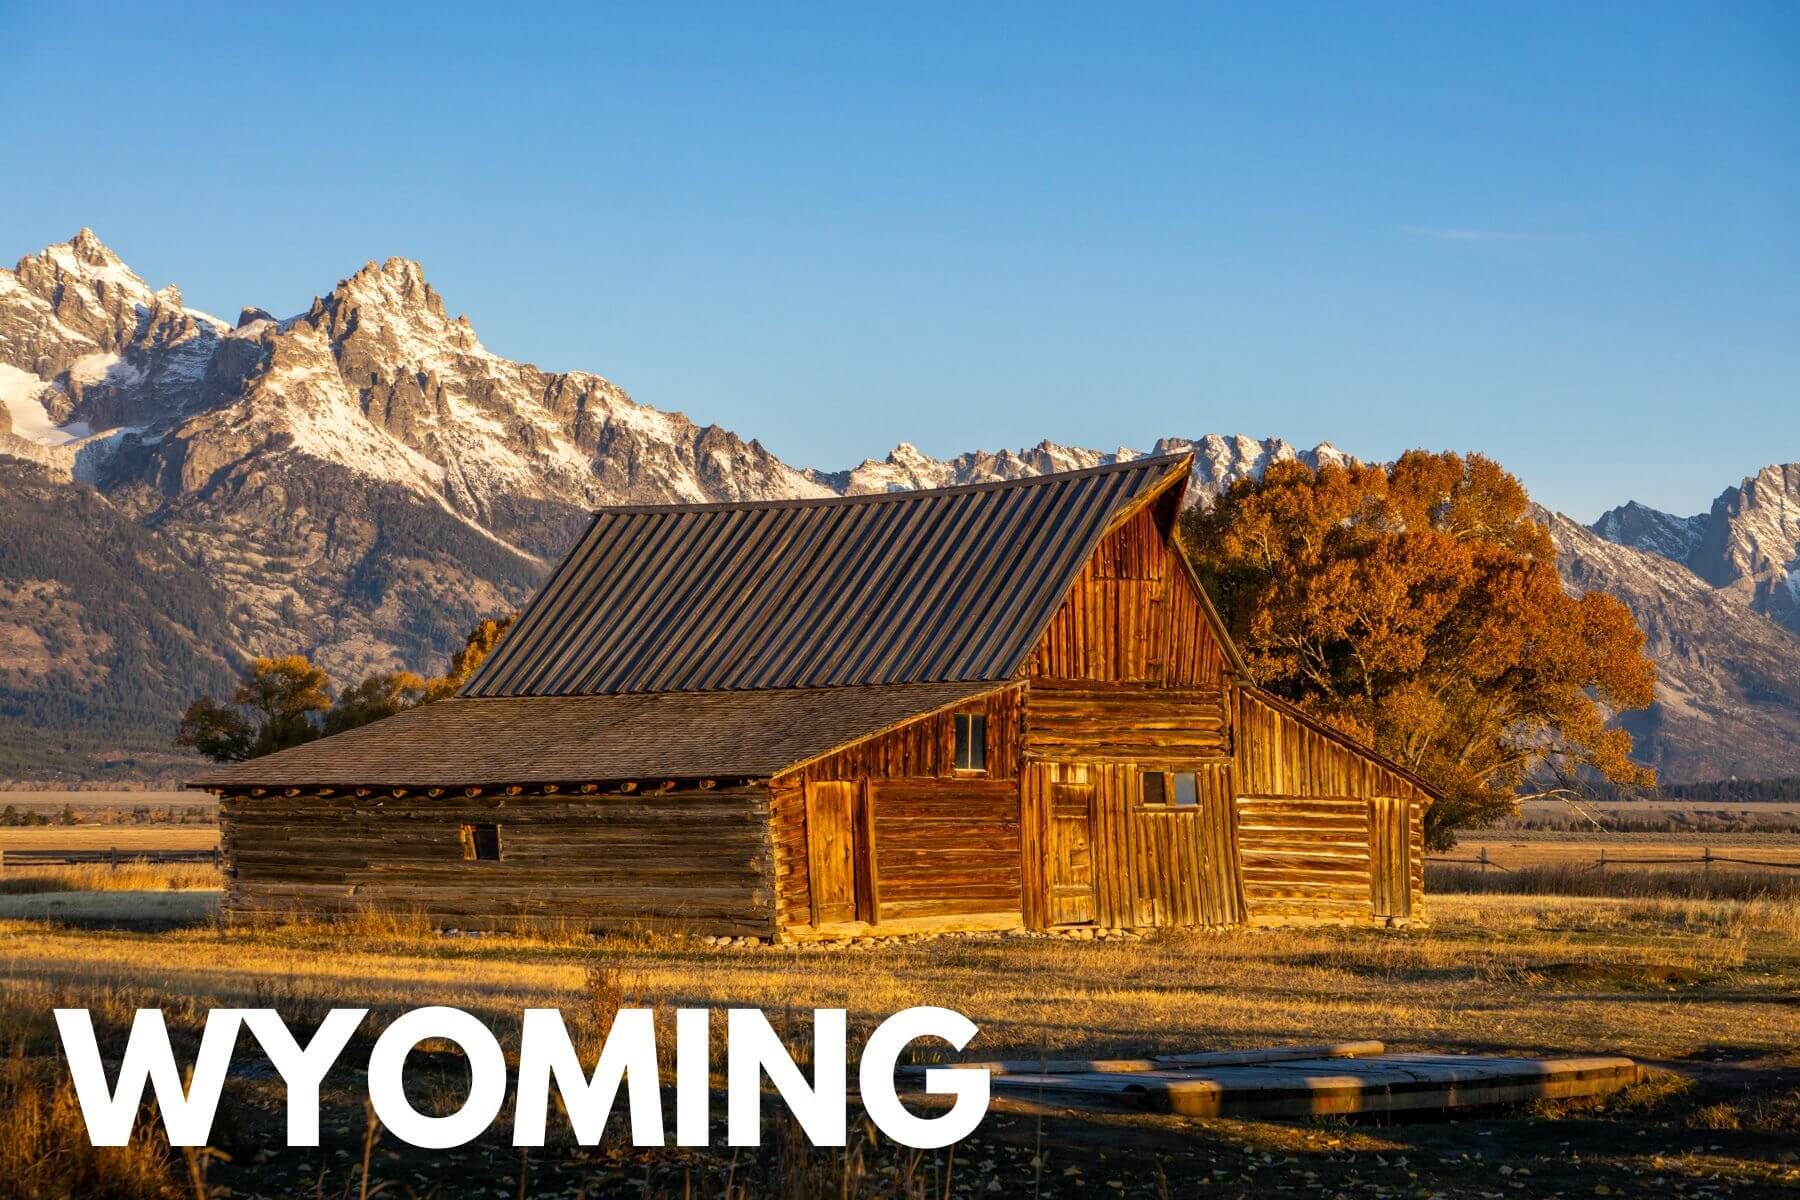 Photo of a wooden barn in a meadow with mountains behind at sunset and the word Wyoming overlaid